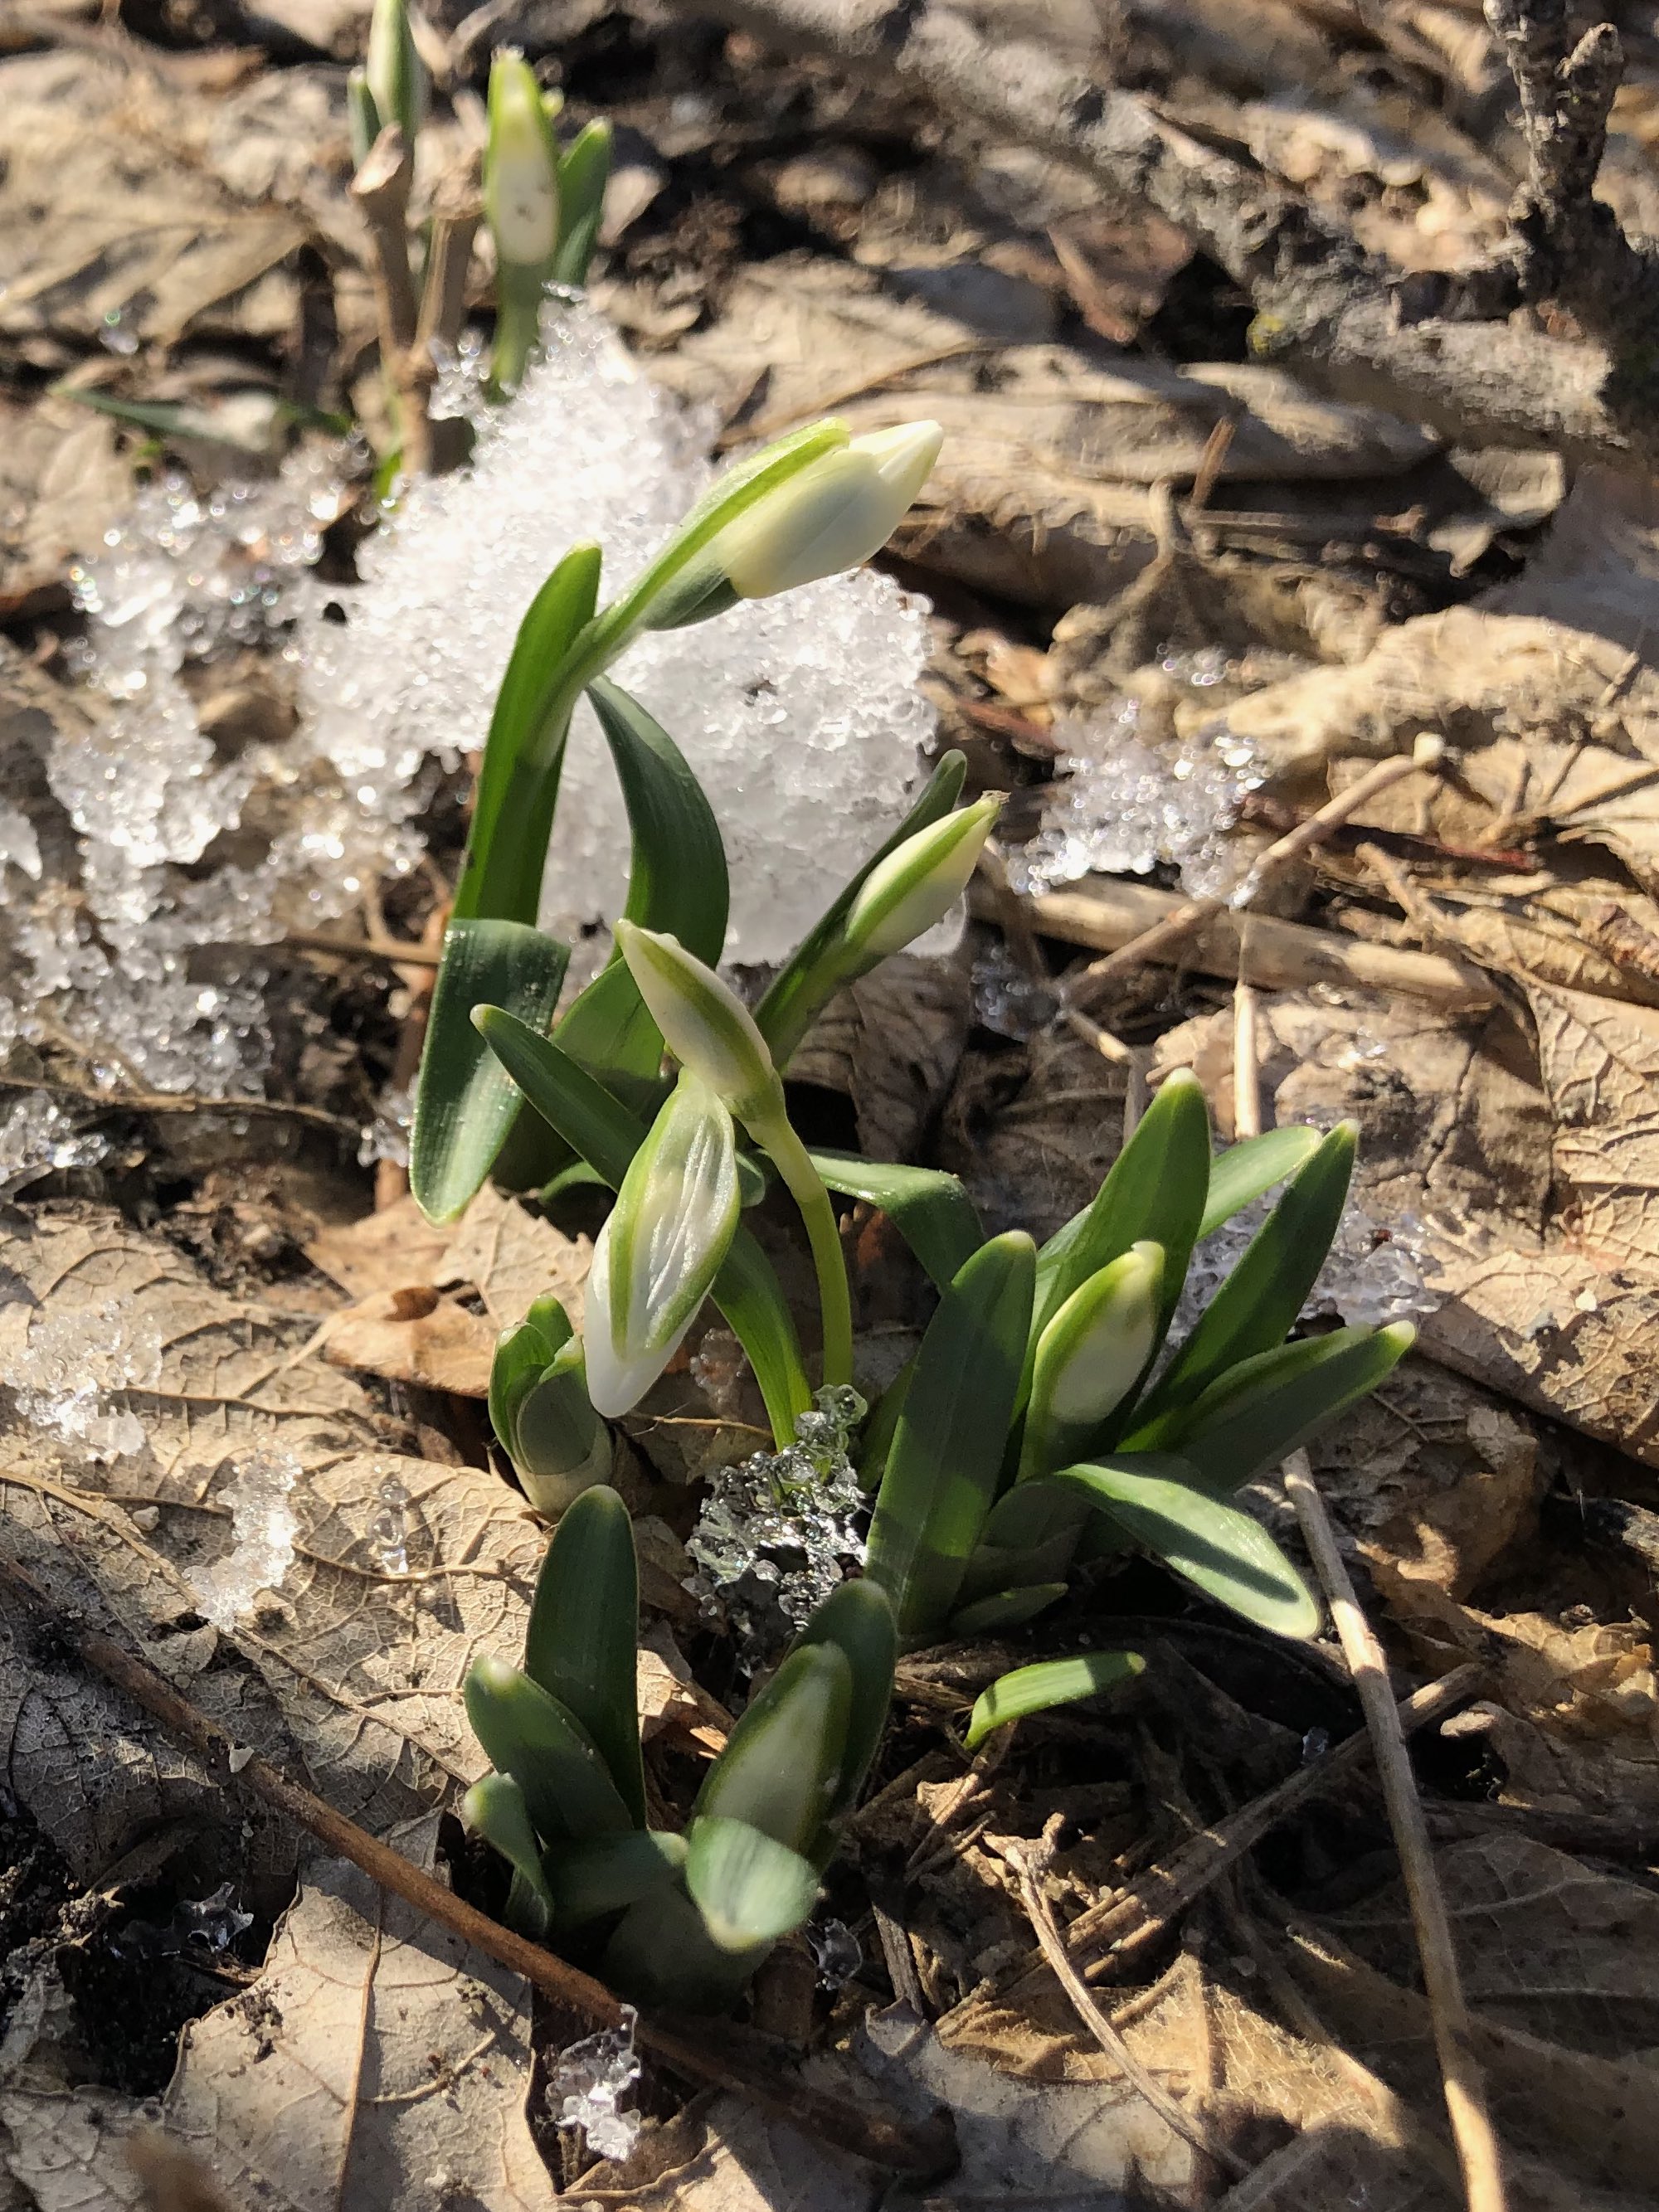 Snowdrops emerging in Madison Wisconsin along Arbor Drive on March 5, 2021.